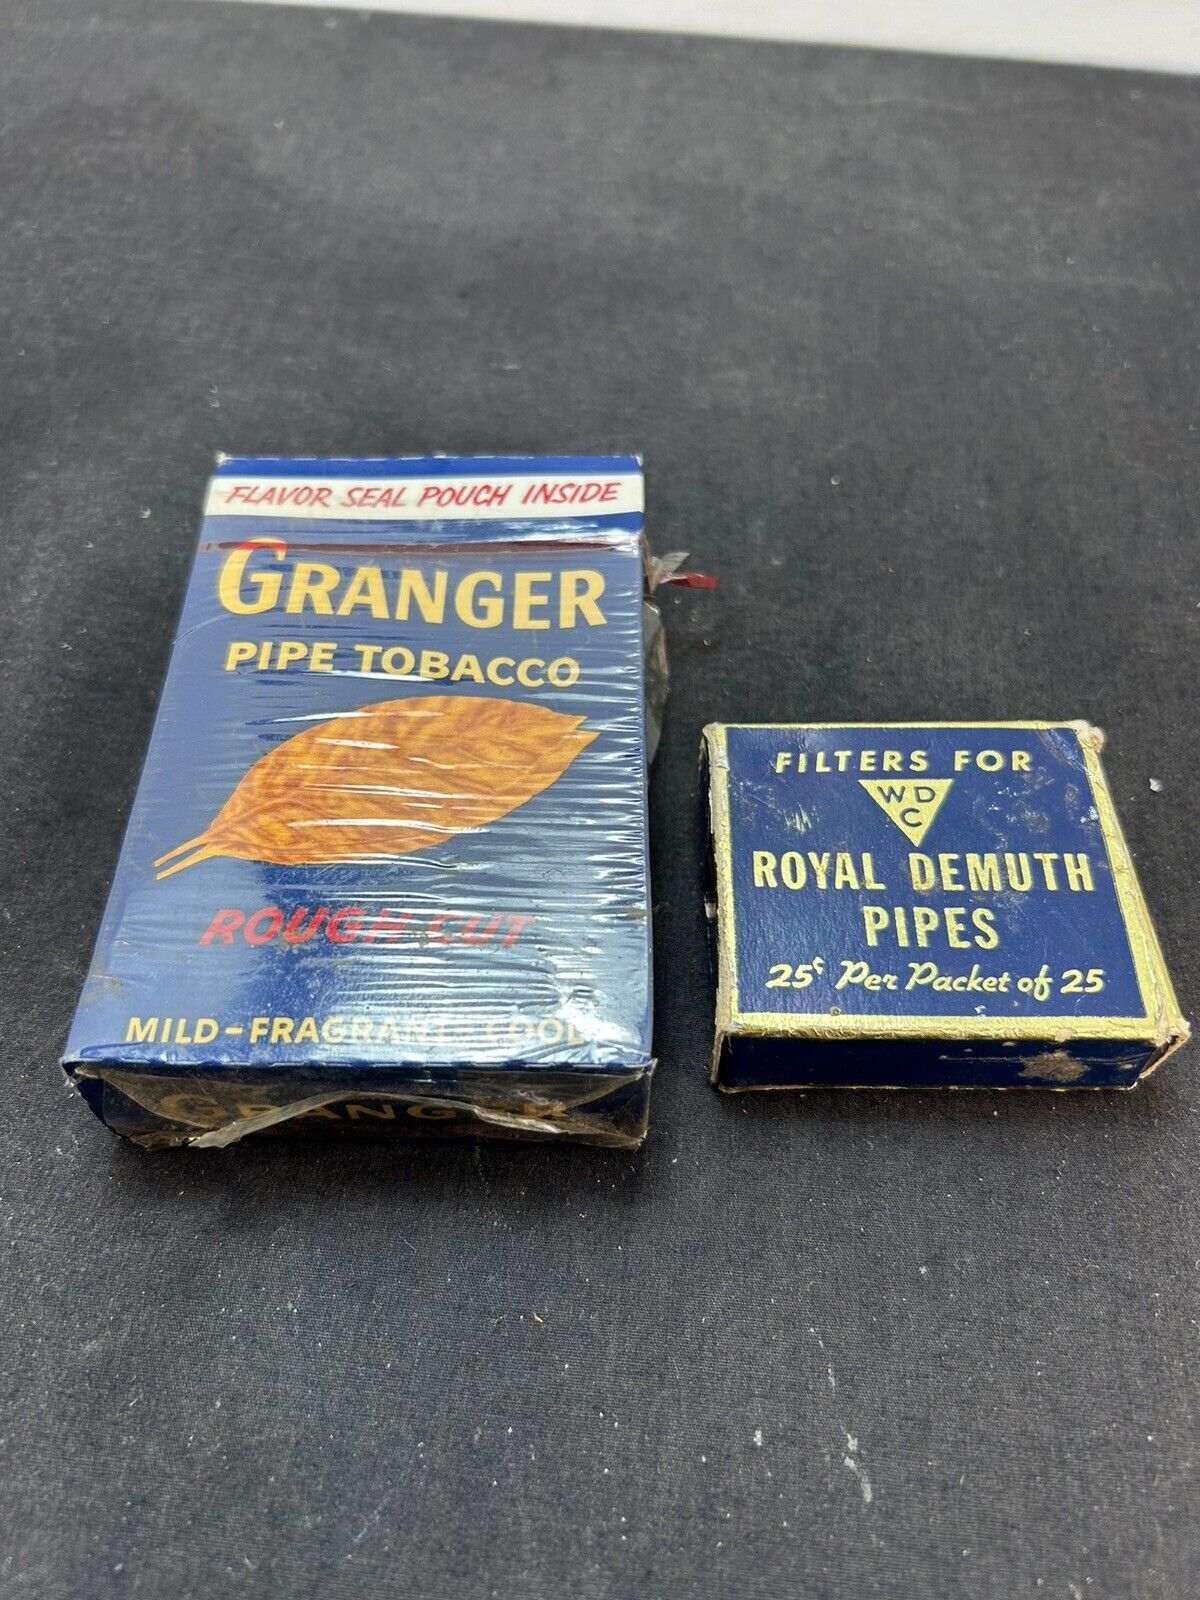 Flavor Sealed Pitch Granger Pipe This Bacon / Filters For Royal Demuth Pipes USA